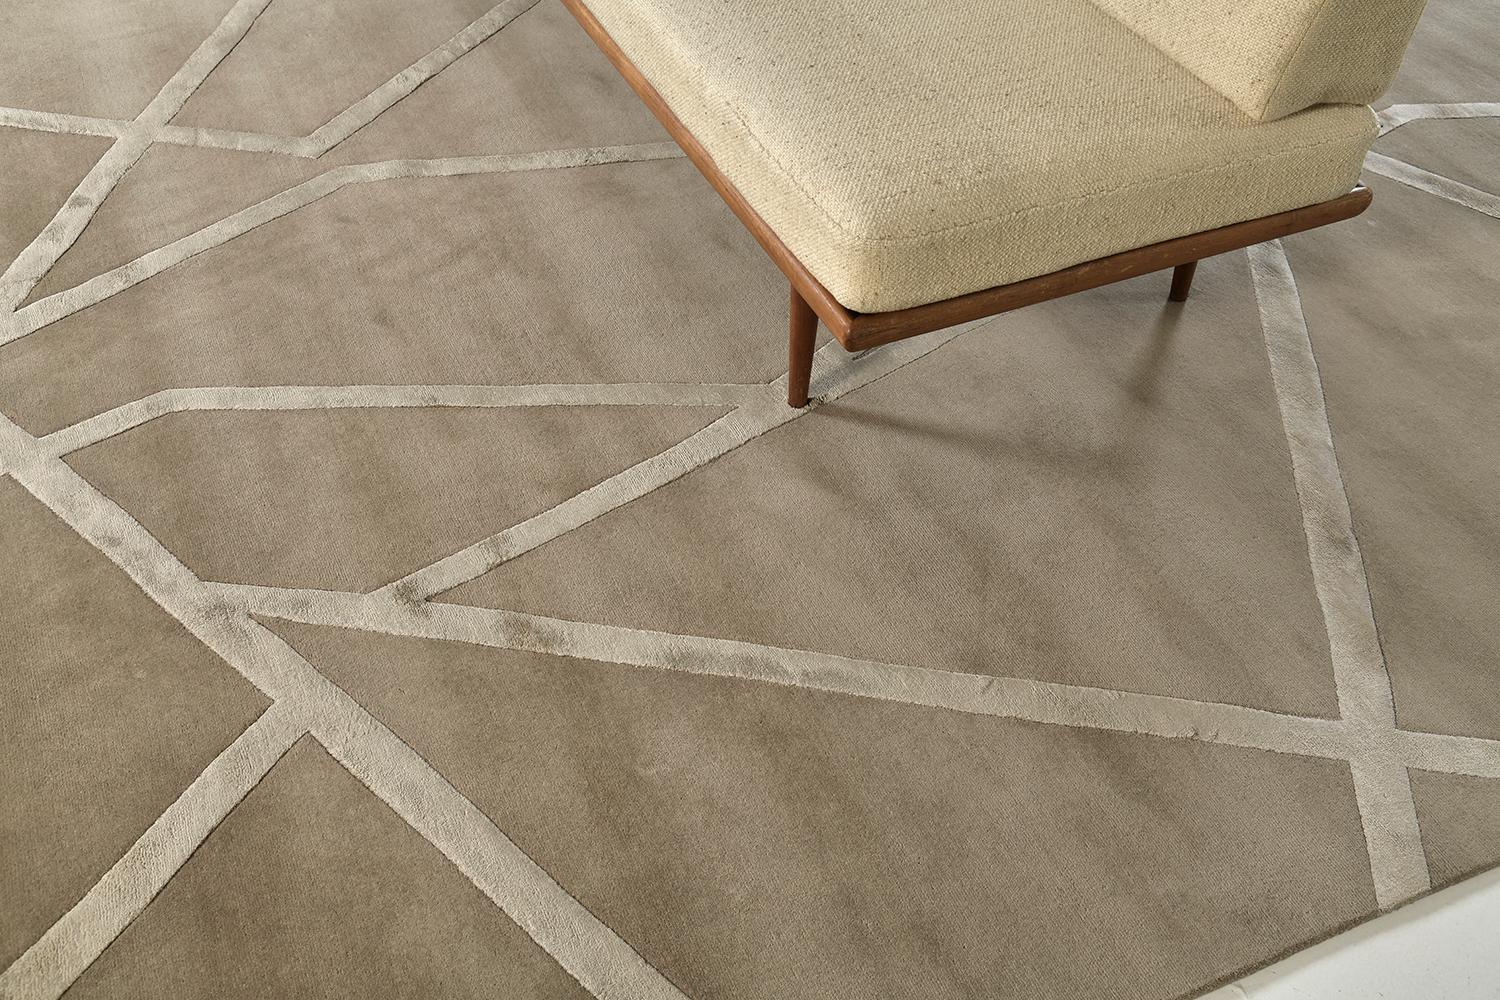 'Bodhi Bar' is an abstract piece that is made up of wool and embossed silk detailing. It is a part of our Design Rhymes Collection which pulls inspiration from different forms of architecture. The fine lines and sharp edges moving through the rug